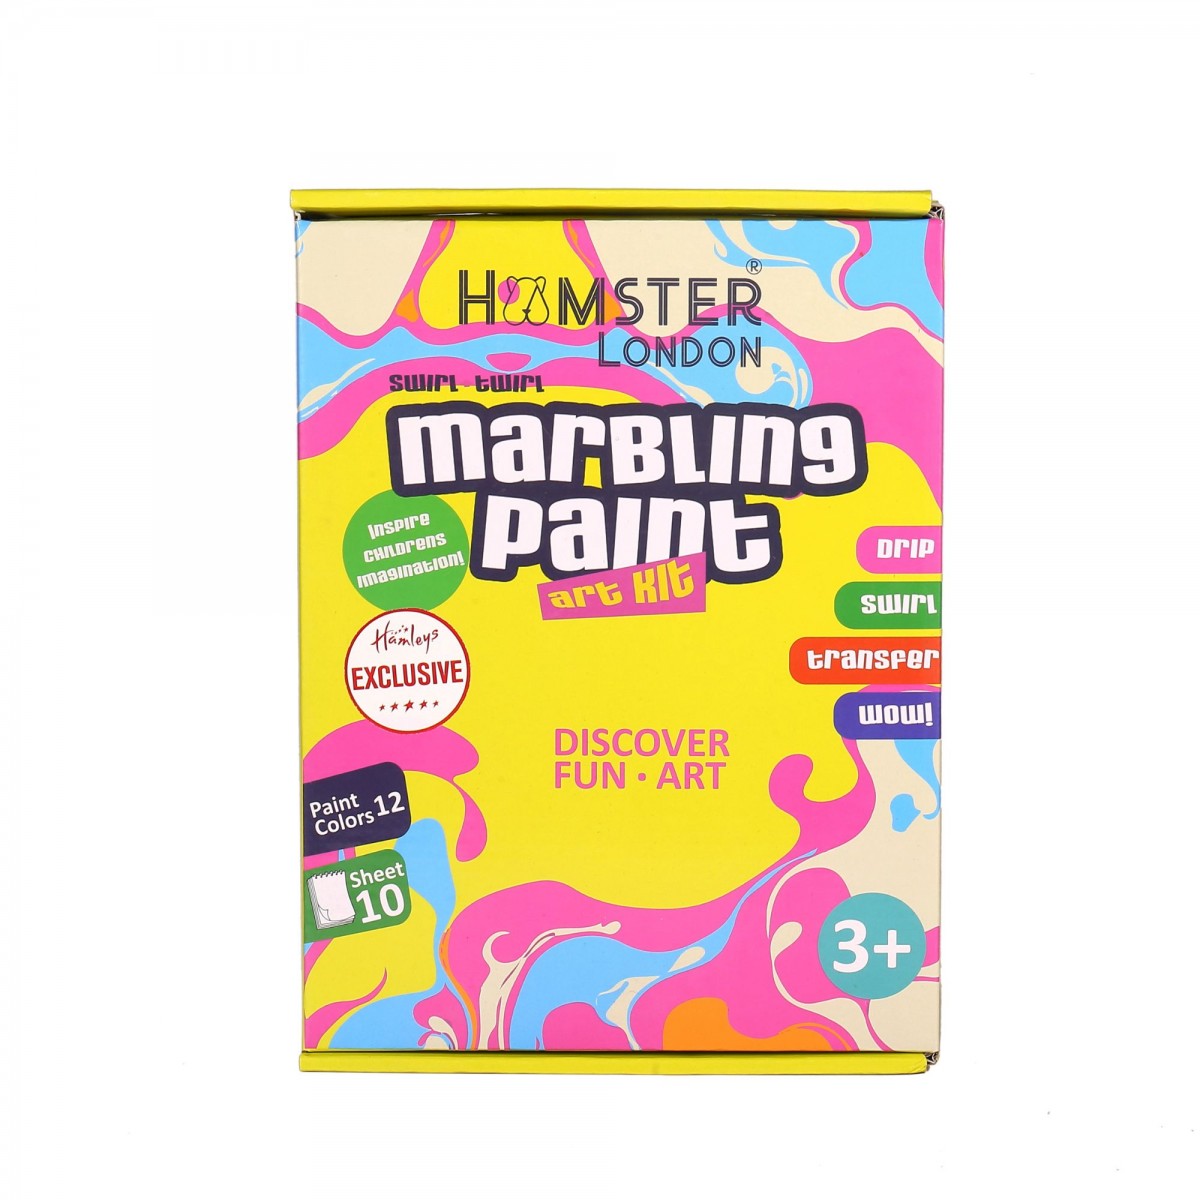 Marbelling Kit Art For Kids By Hamster London, Arts and Crafts for Girls & Boys, Craft Activities For Kids, Multicolour, 3Y+